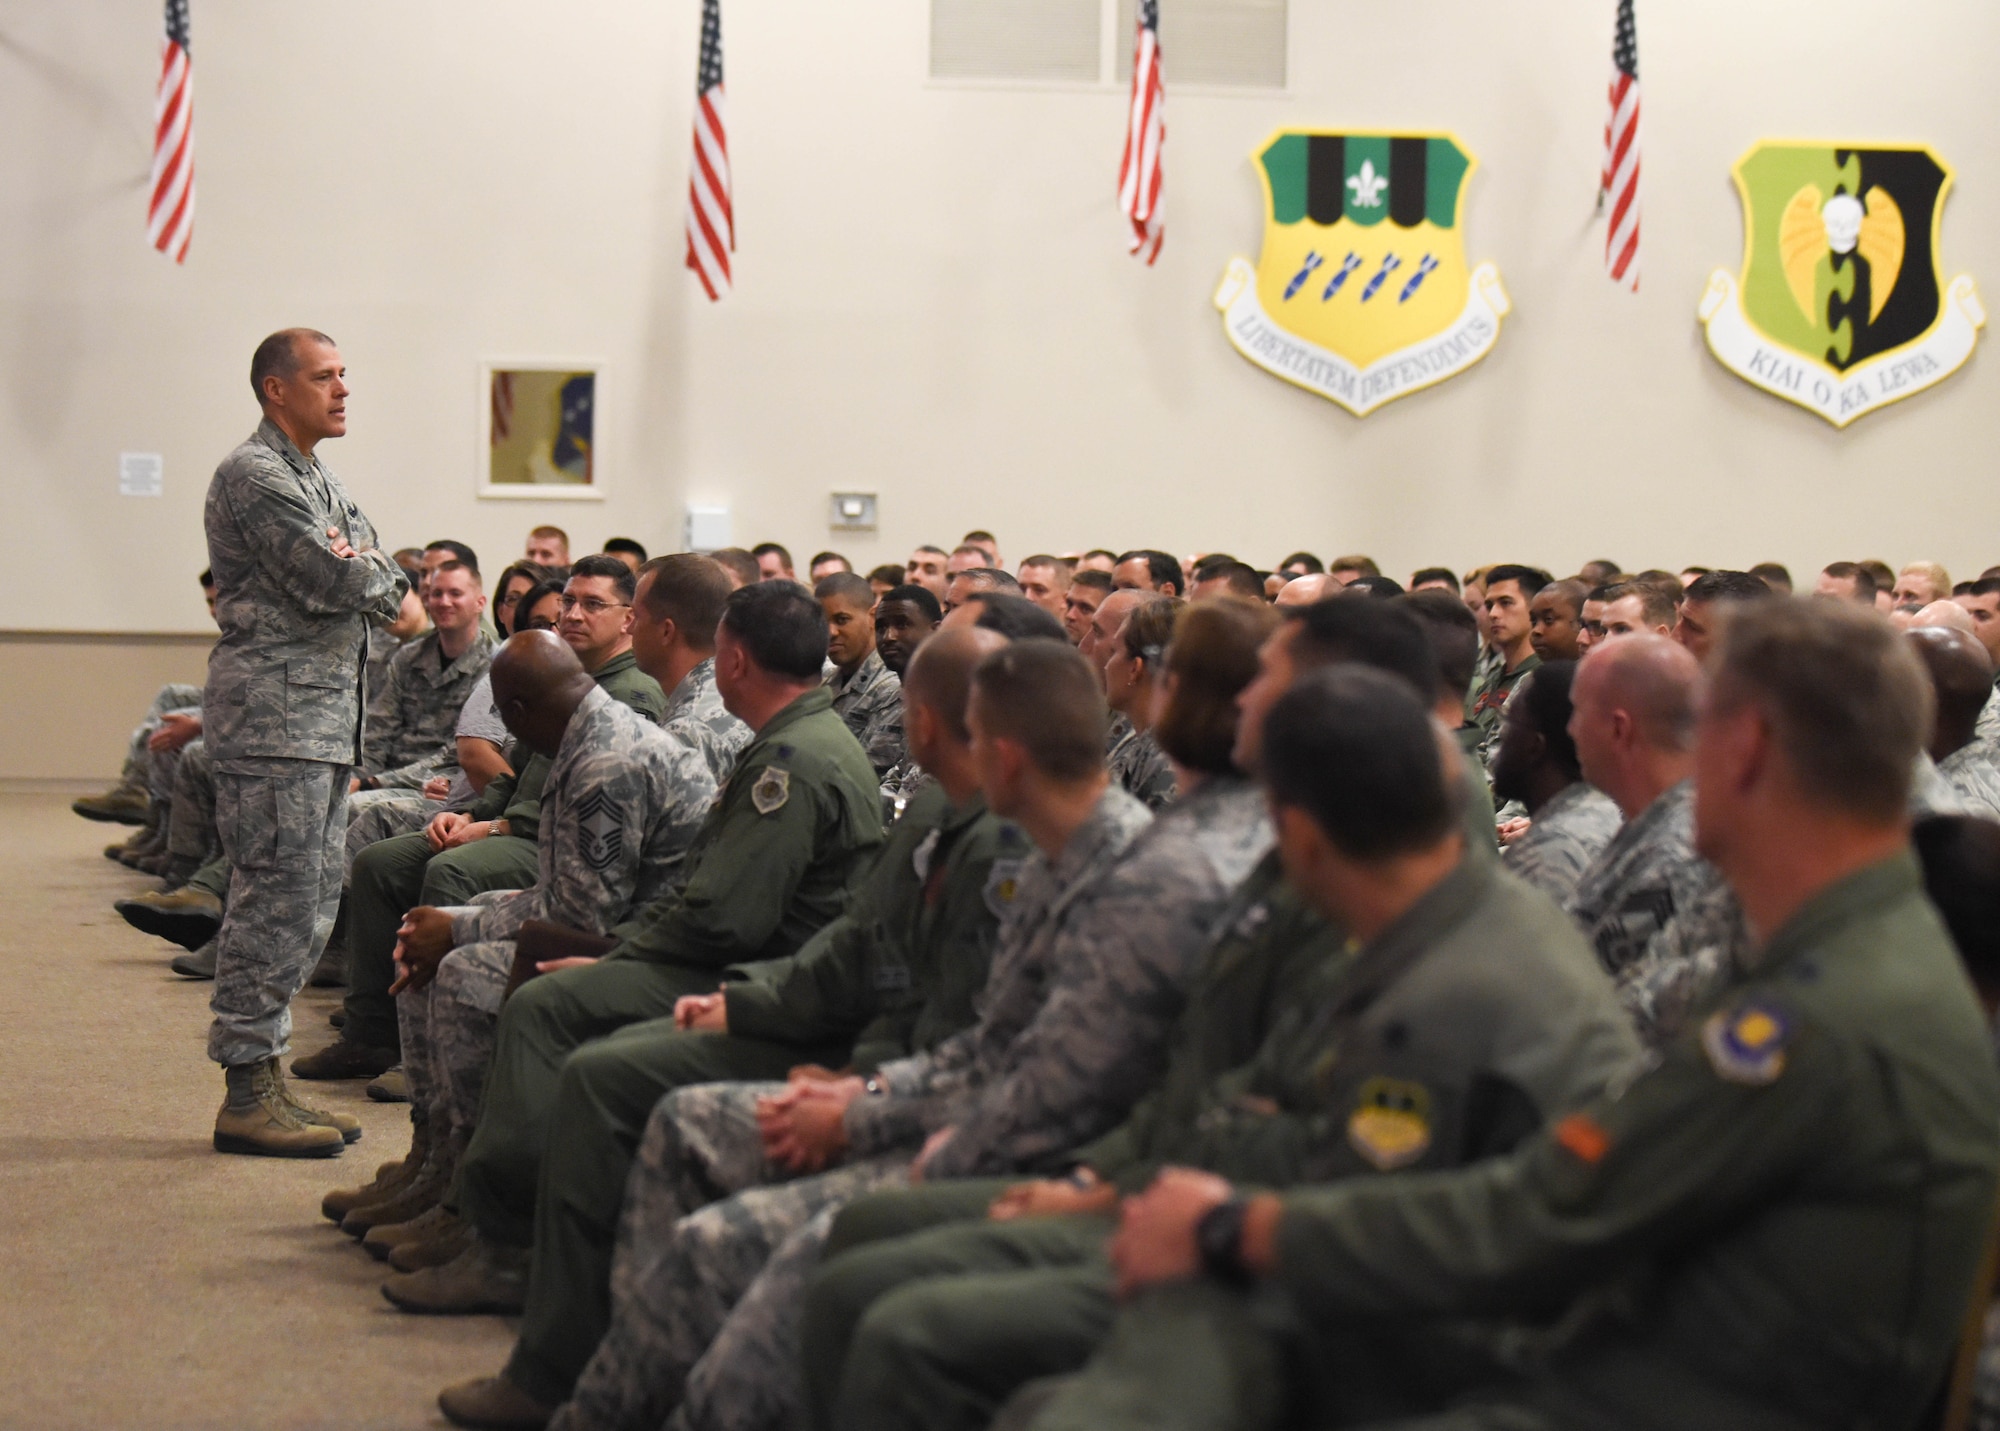 Maj. Gen. Thomas Bussiere, 8th Air Force commander, speaks to Airmen during his commander’s call at Hoban Hall at Barksdale Air Force Bases, La., April 21, 2017. Bussiere spoke about the 8th Air Force’s mission and objectives. (U.S. Air Force photo/Airman 1st Class Sydney Bennett)